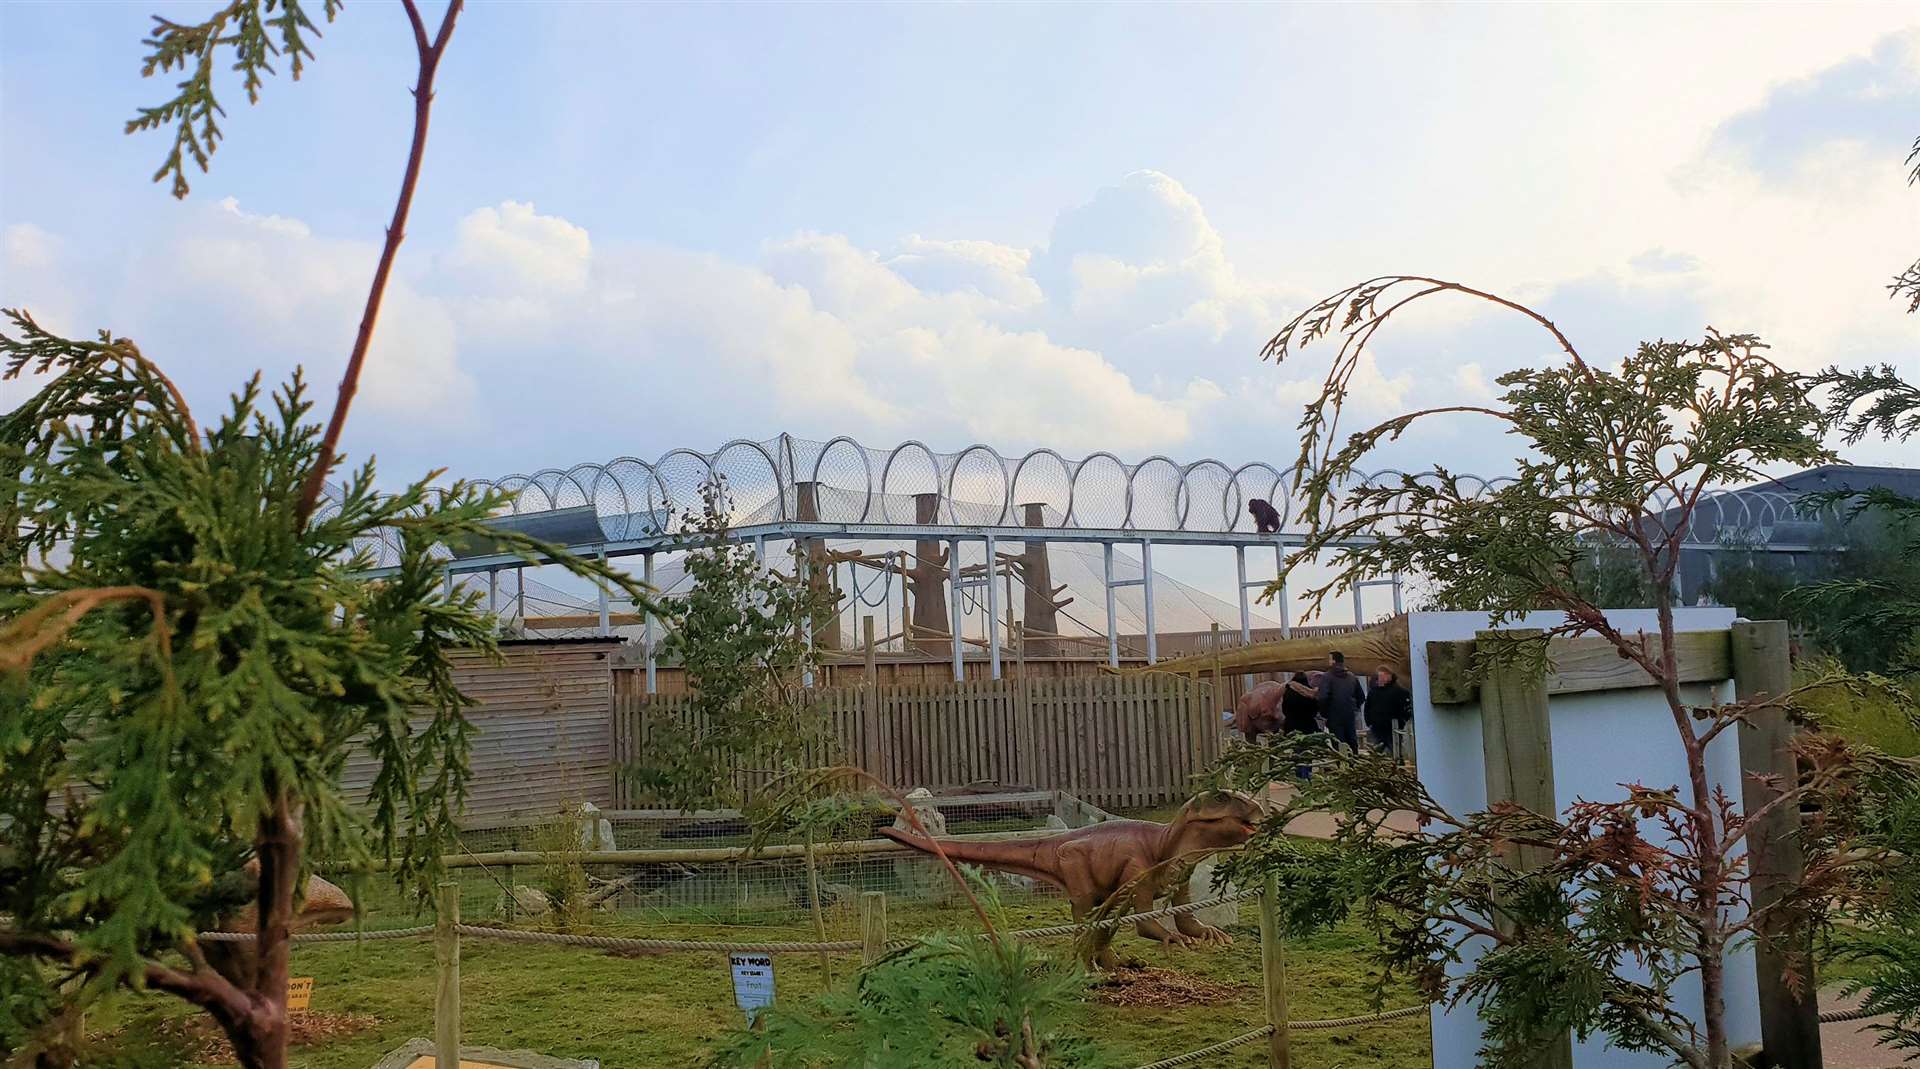 Park visitors will be able to see the apes as they walk along the corridor